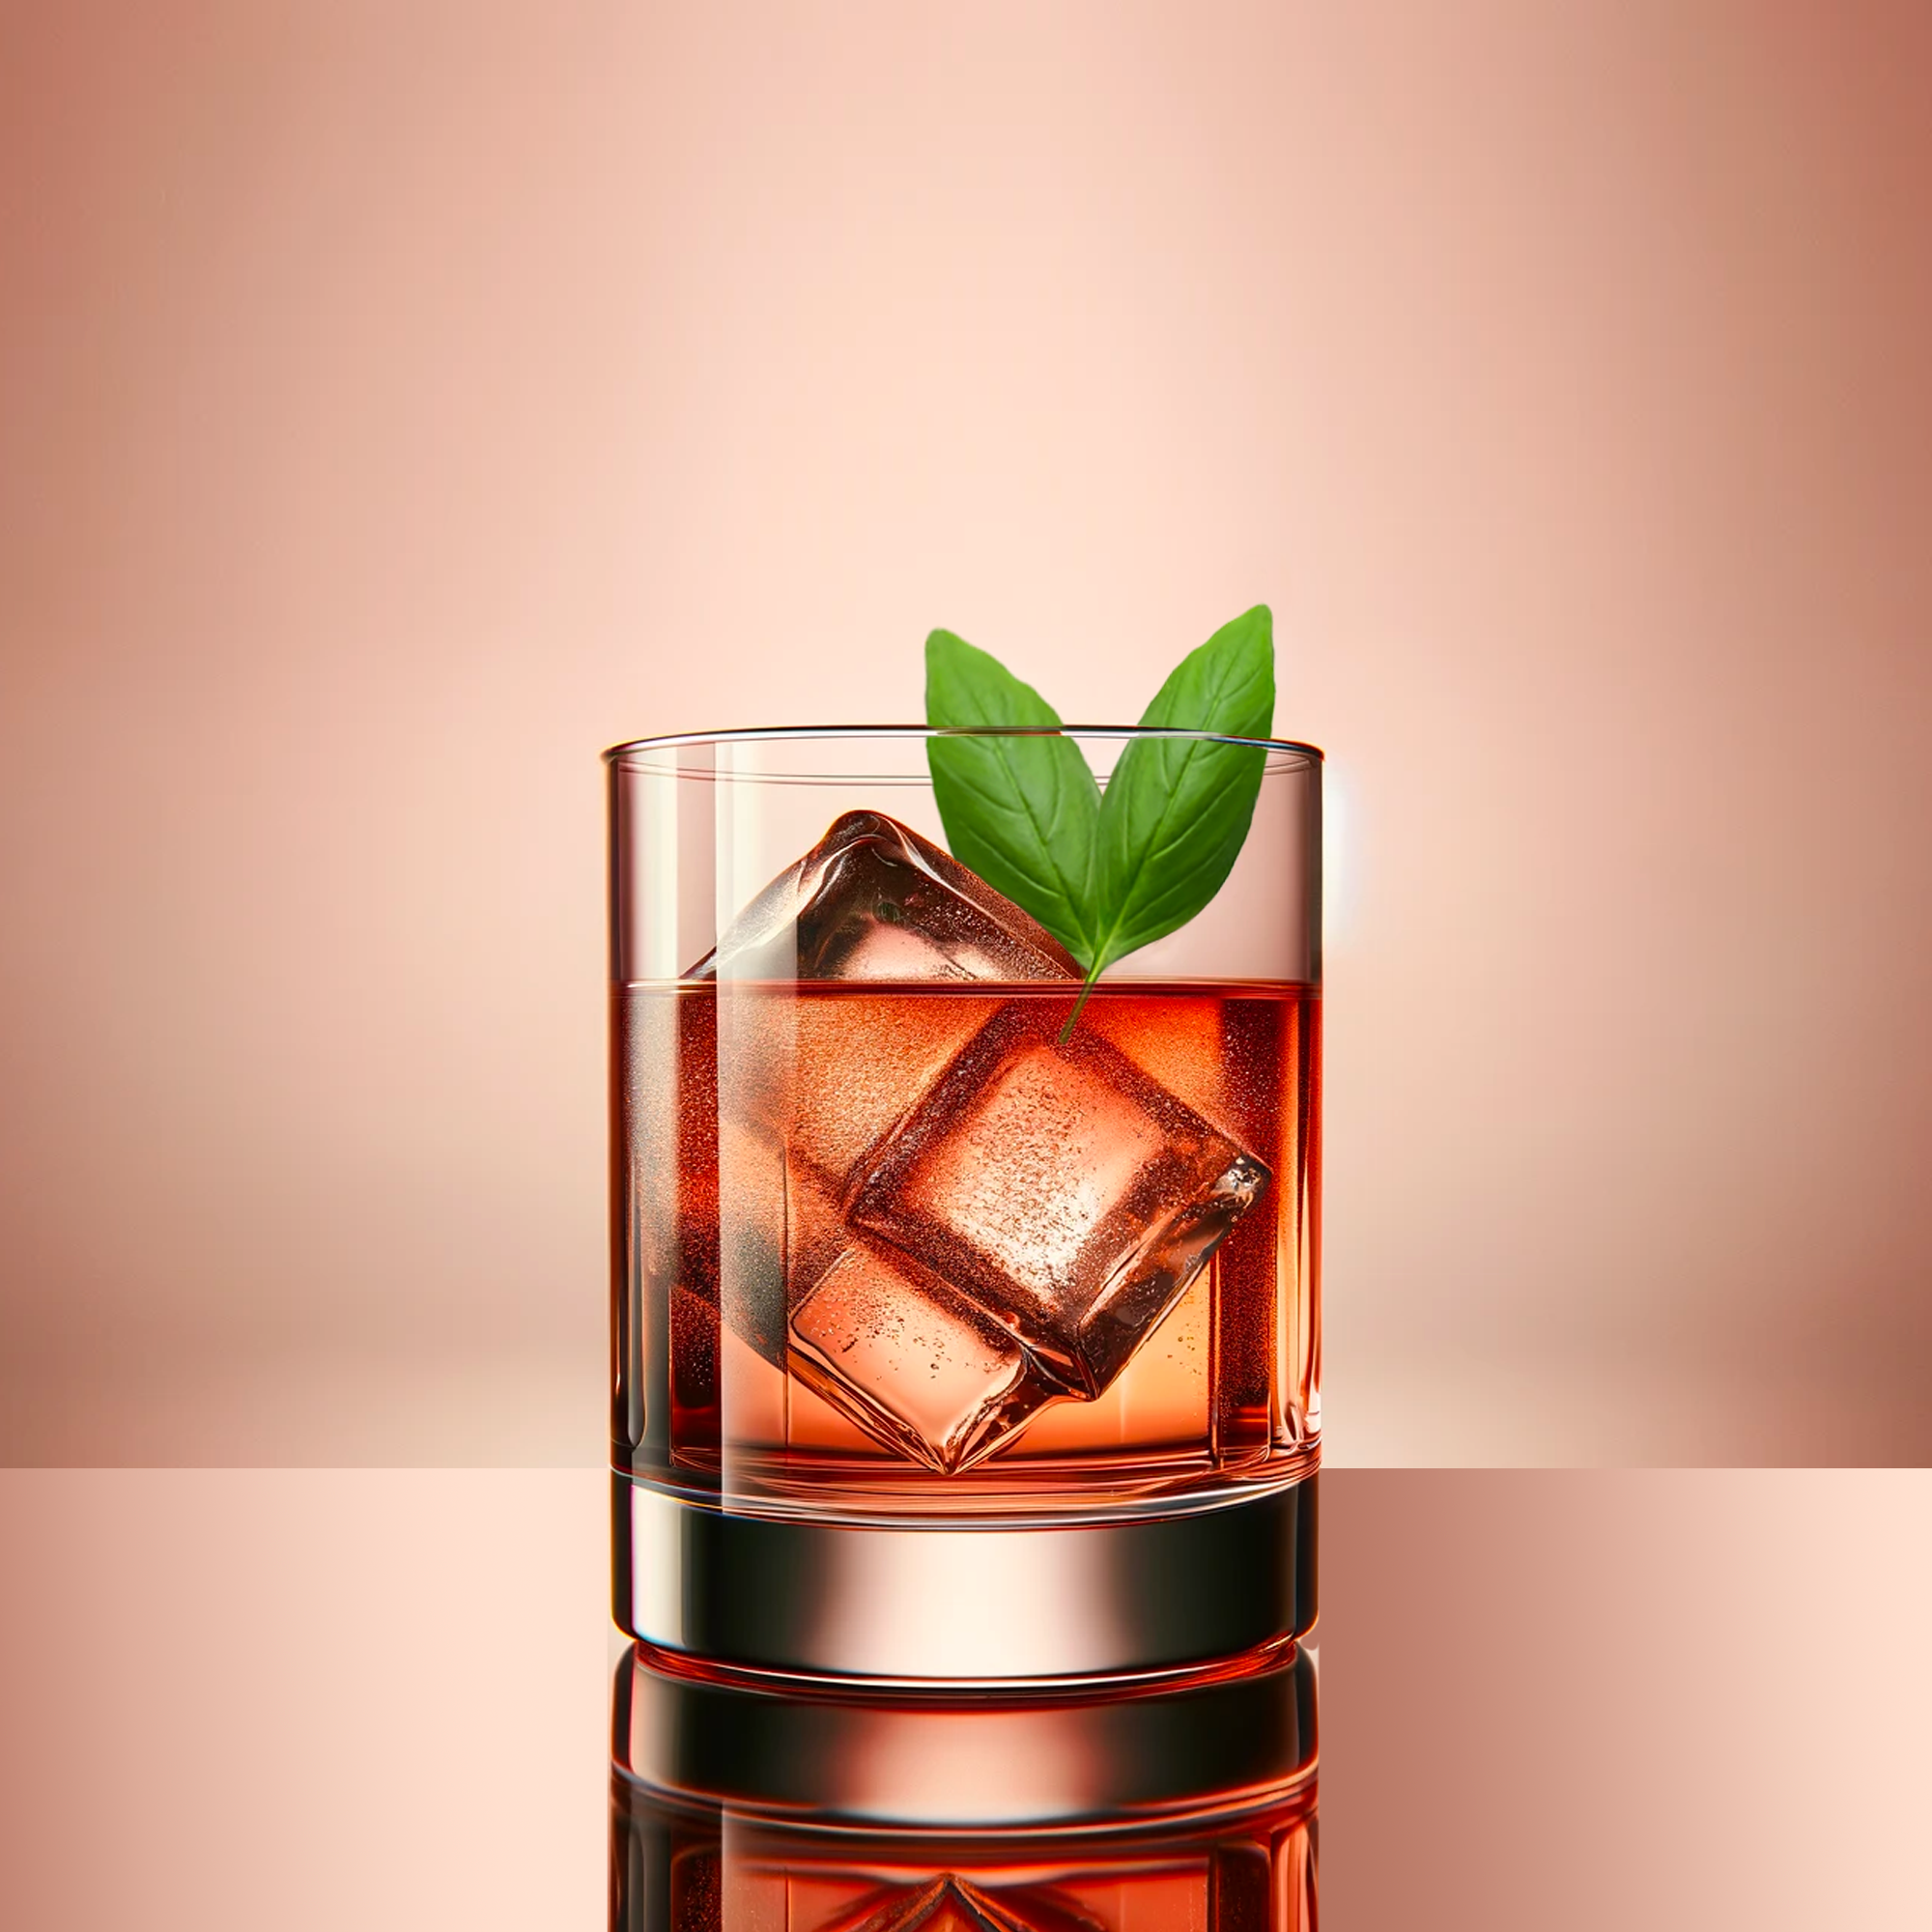 a Pierre Collins cocktail on ice in a whisky old fashioned glass. Pink cocktail with two basil leaves as garnish. blush pink background